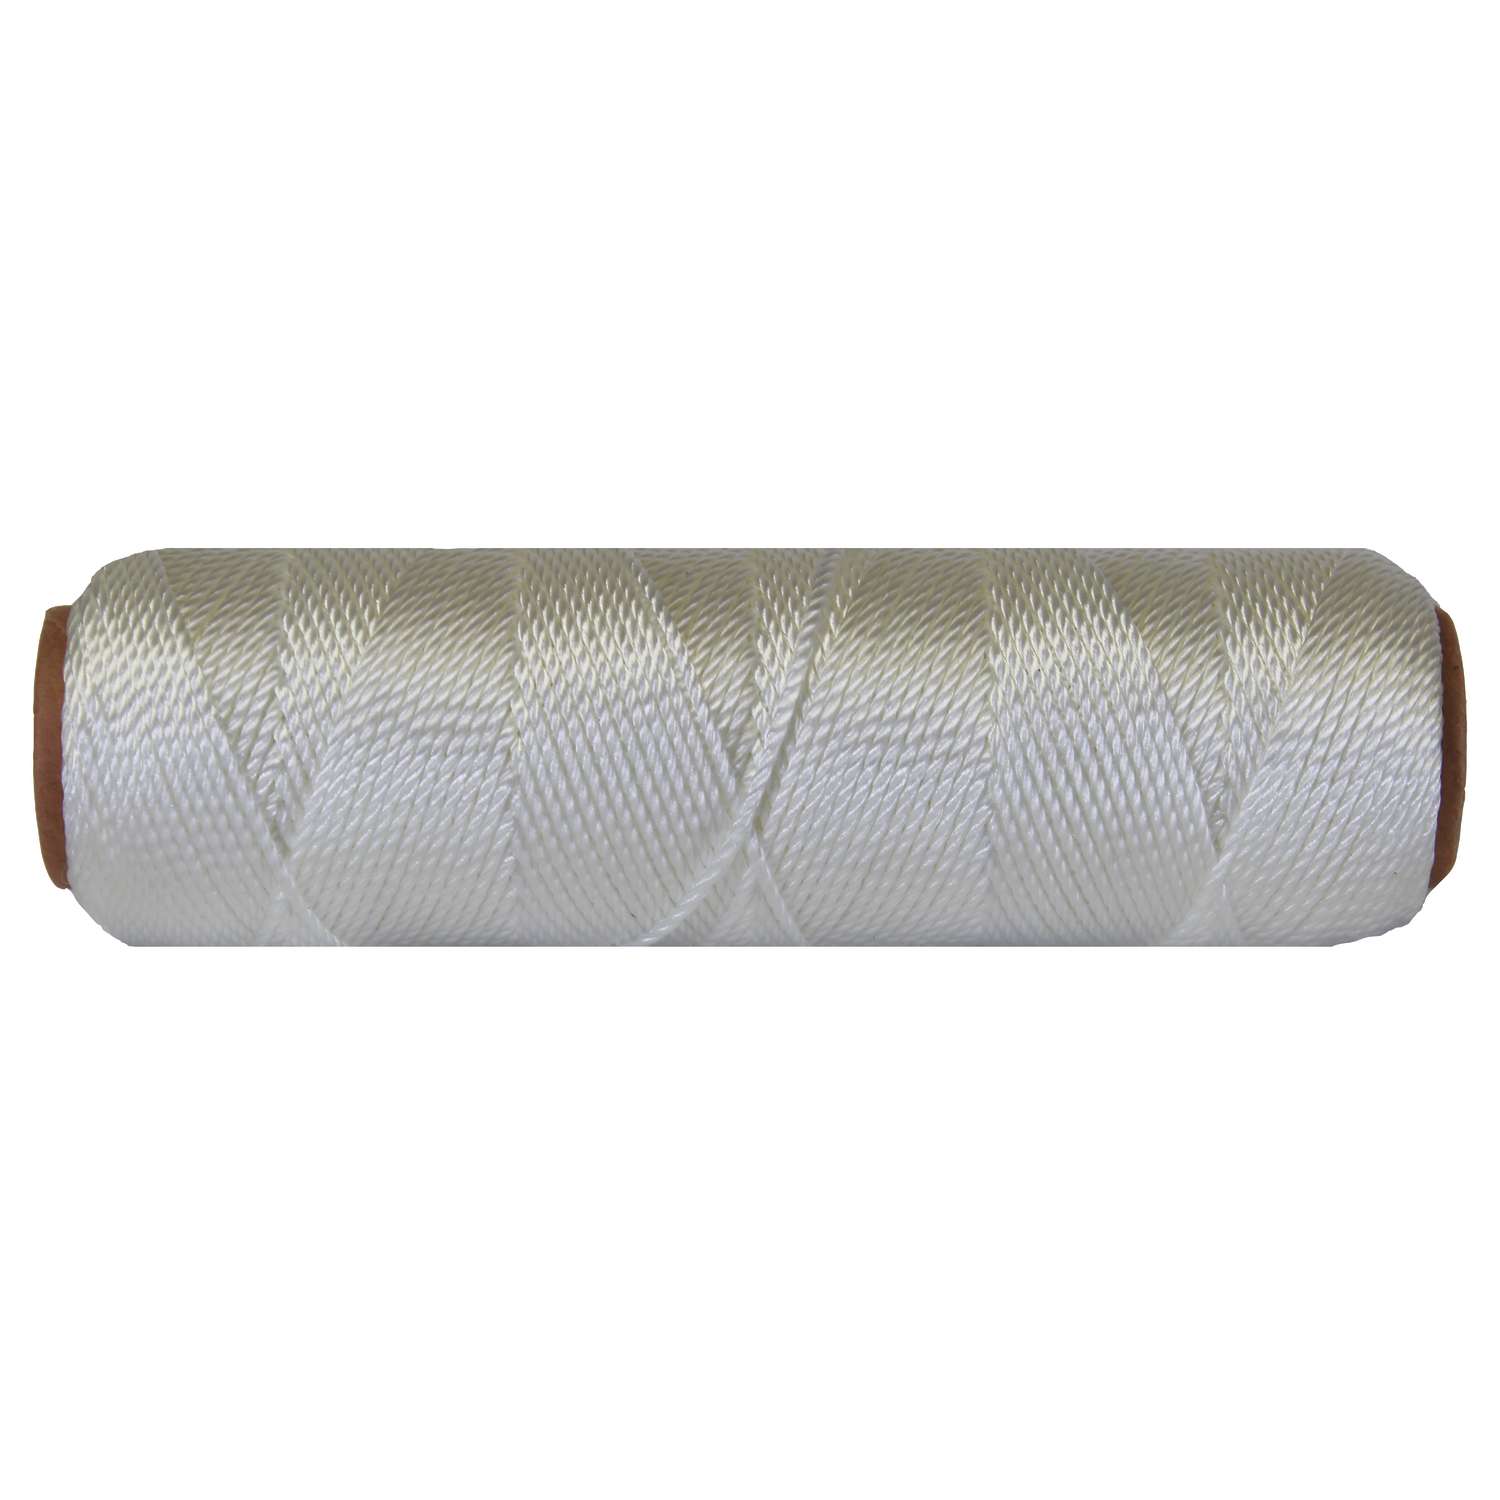 Ace 18 in. D X 260 ft. L White Twisted Nylon Twine